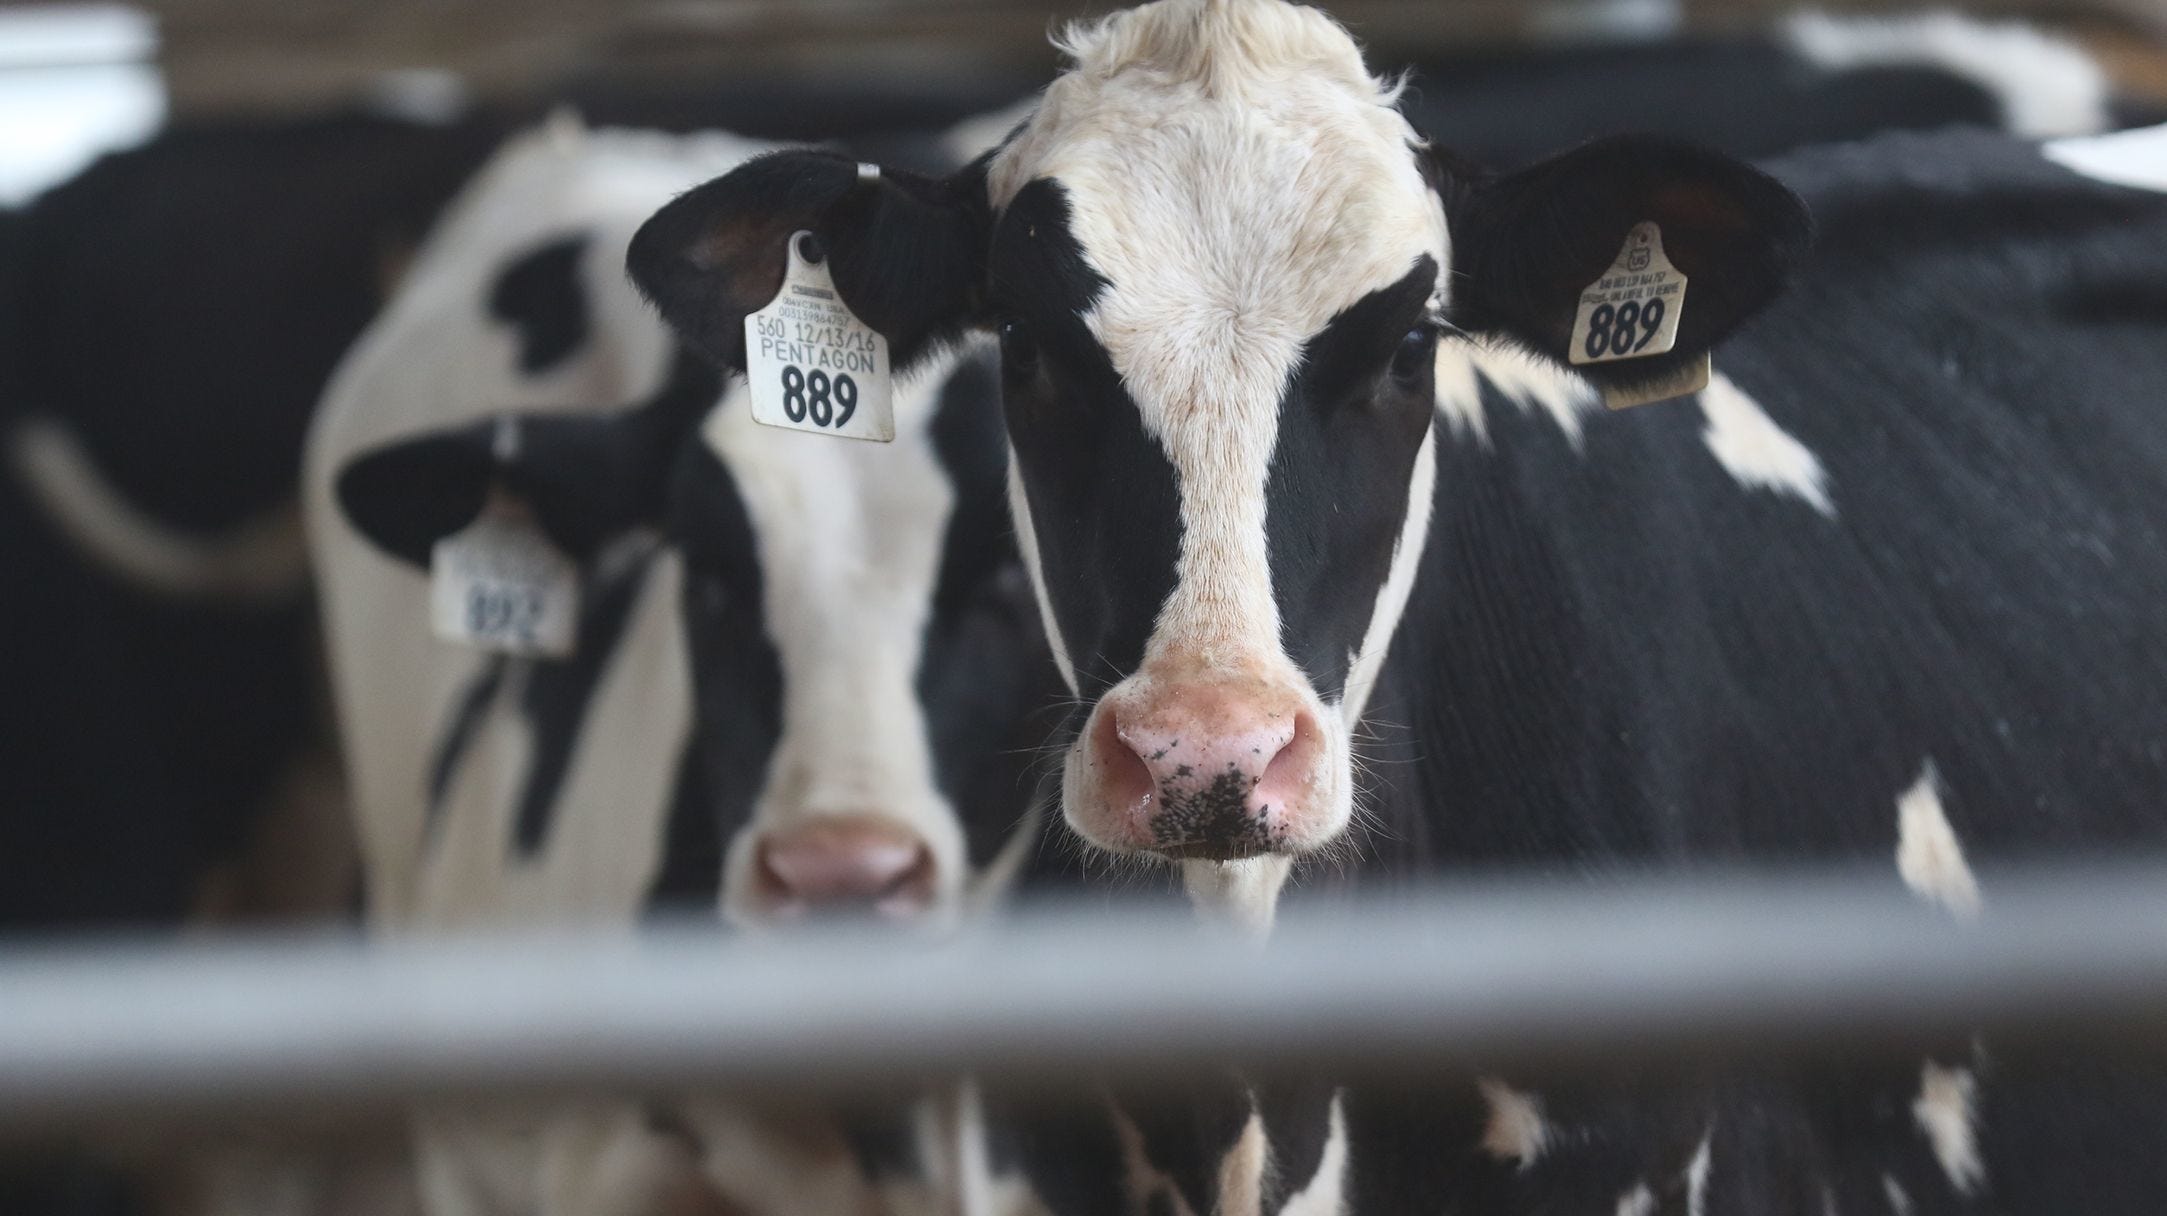 A Dane County dairy herd at Maier Farms remains under quarantine for bovine tuberculosis since October 2018.